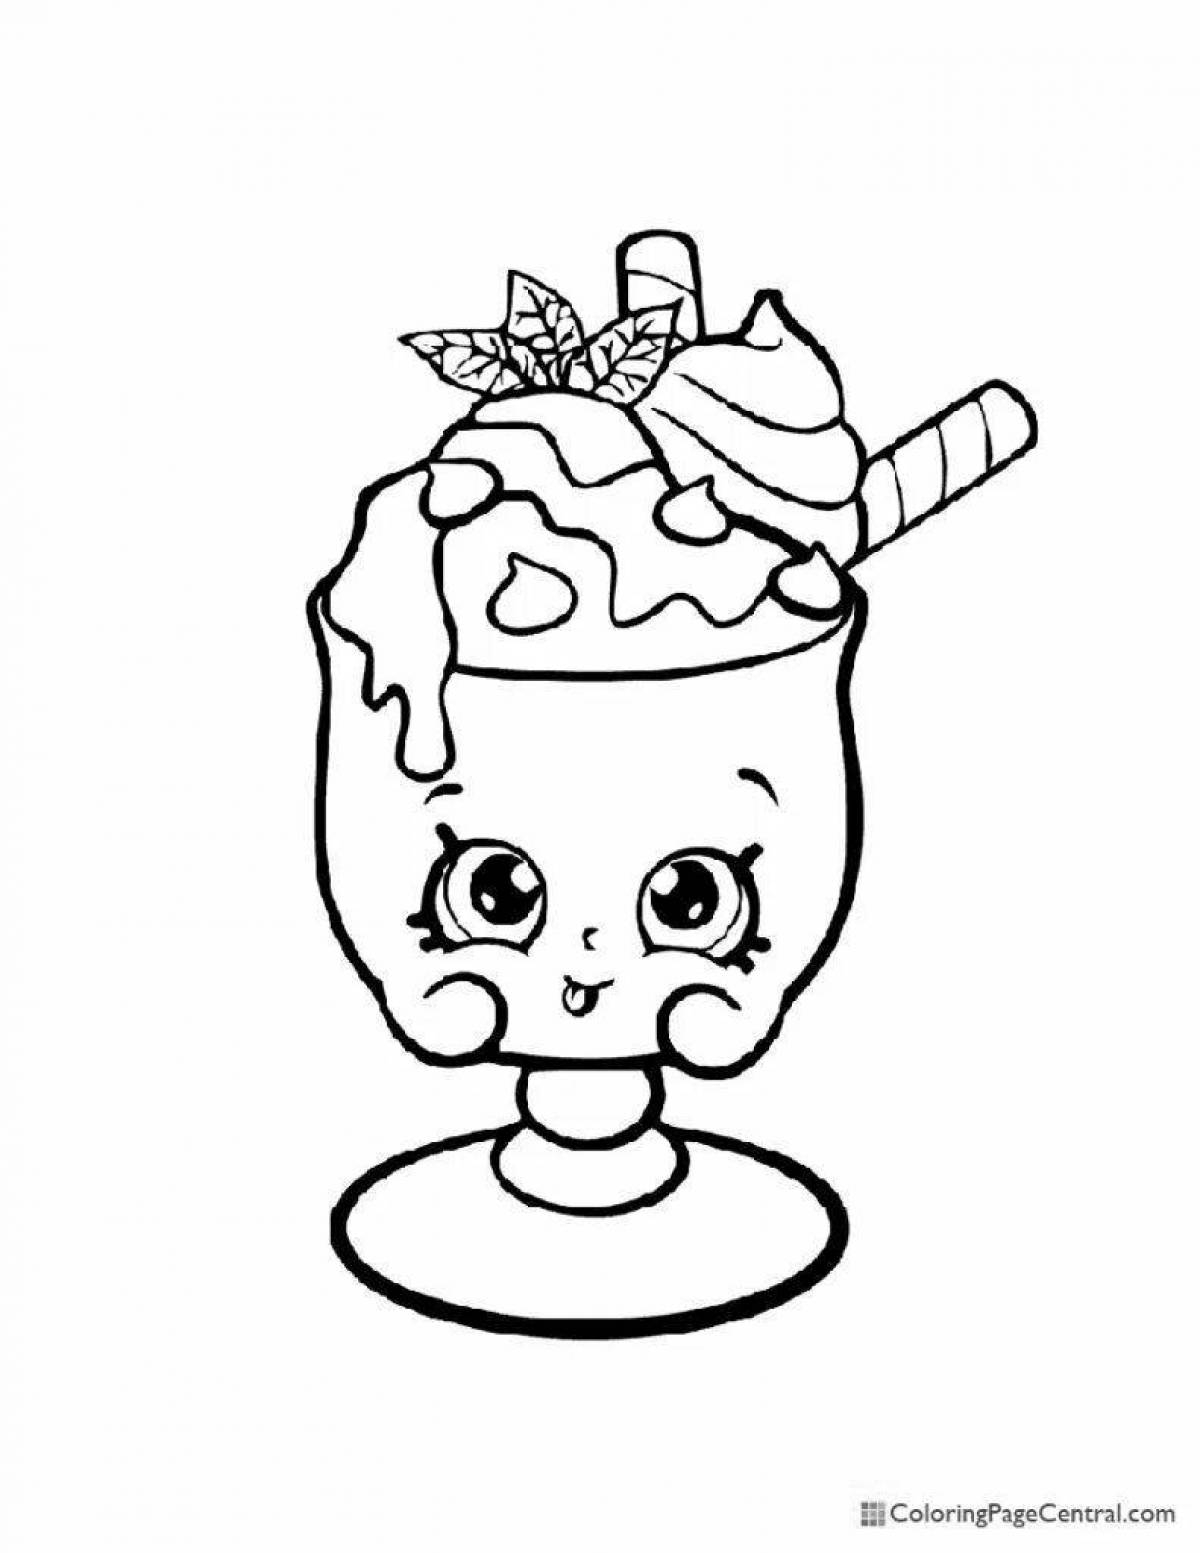 Attractive marshmallow coloring page